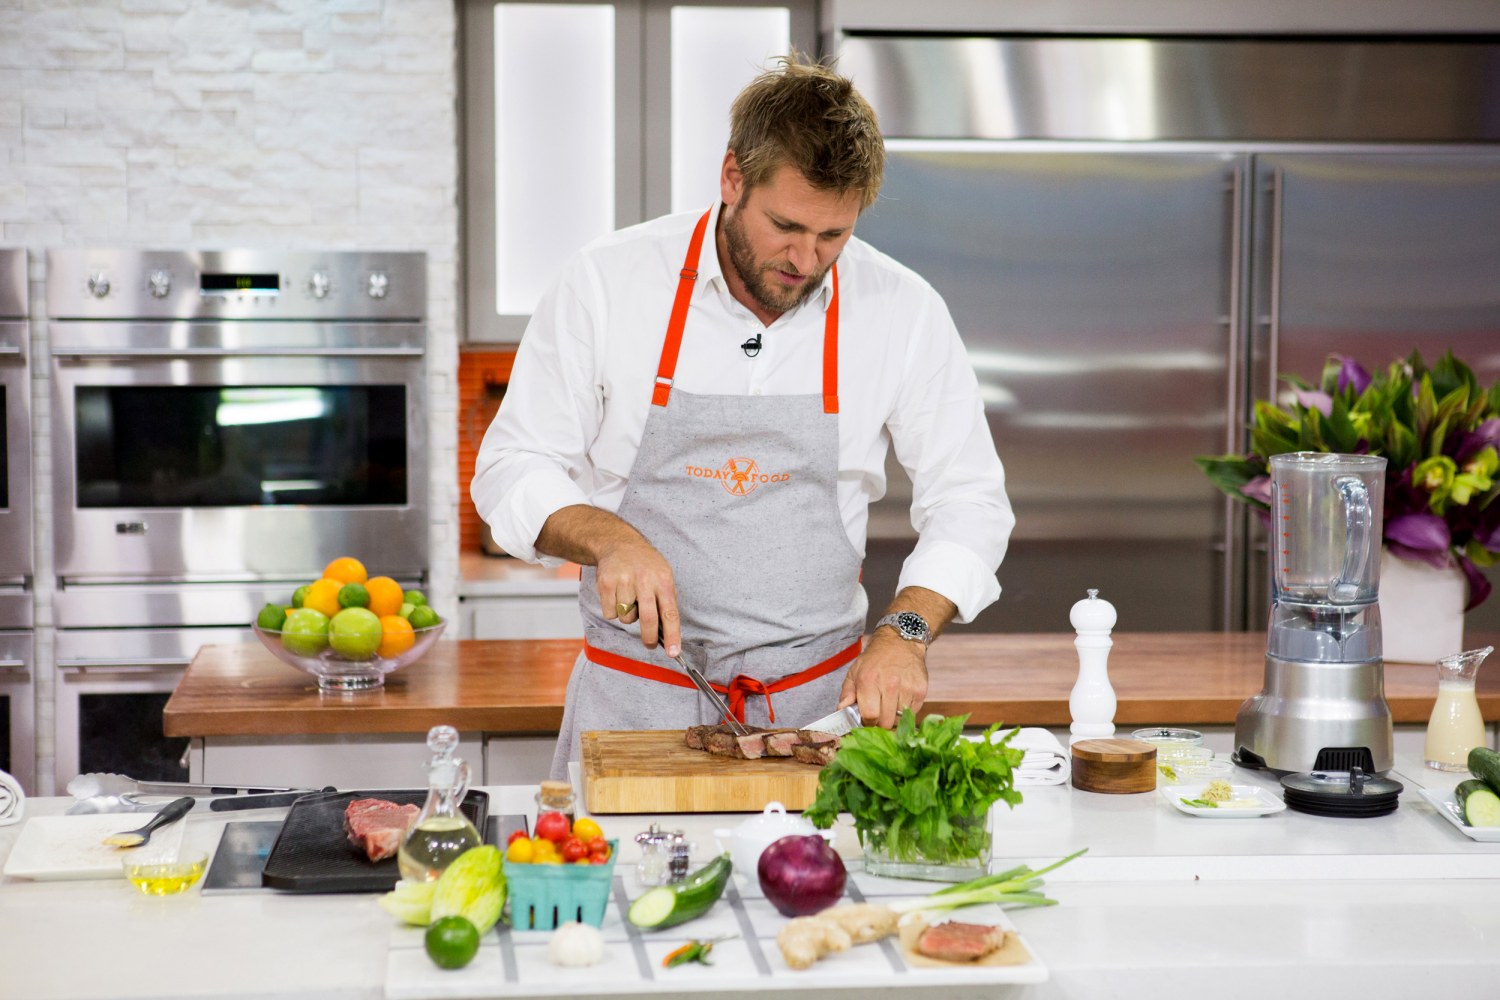 Curtis Stone  Kitchen Products